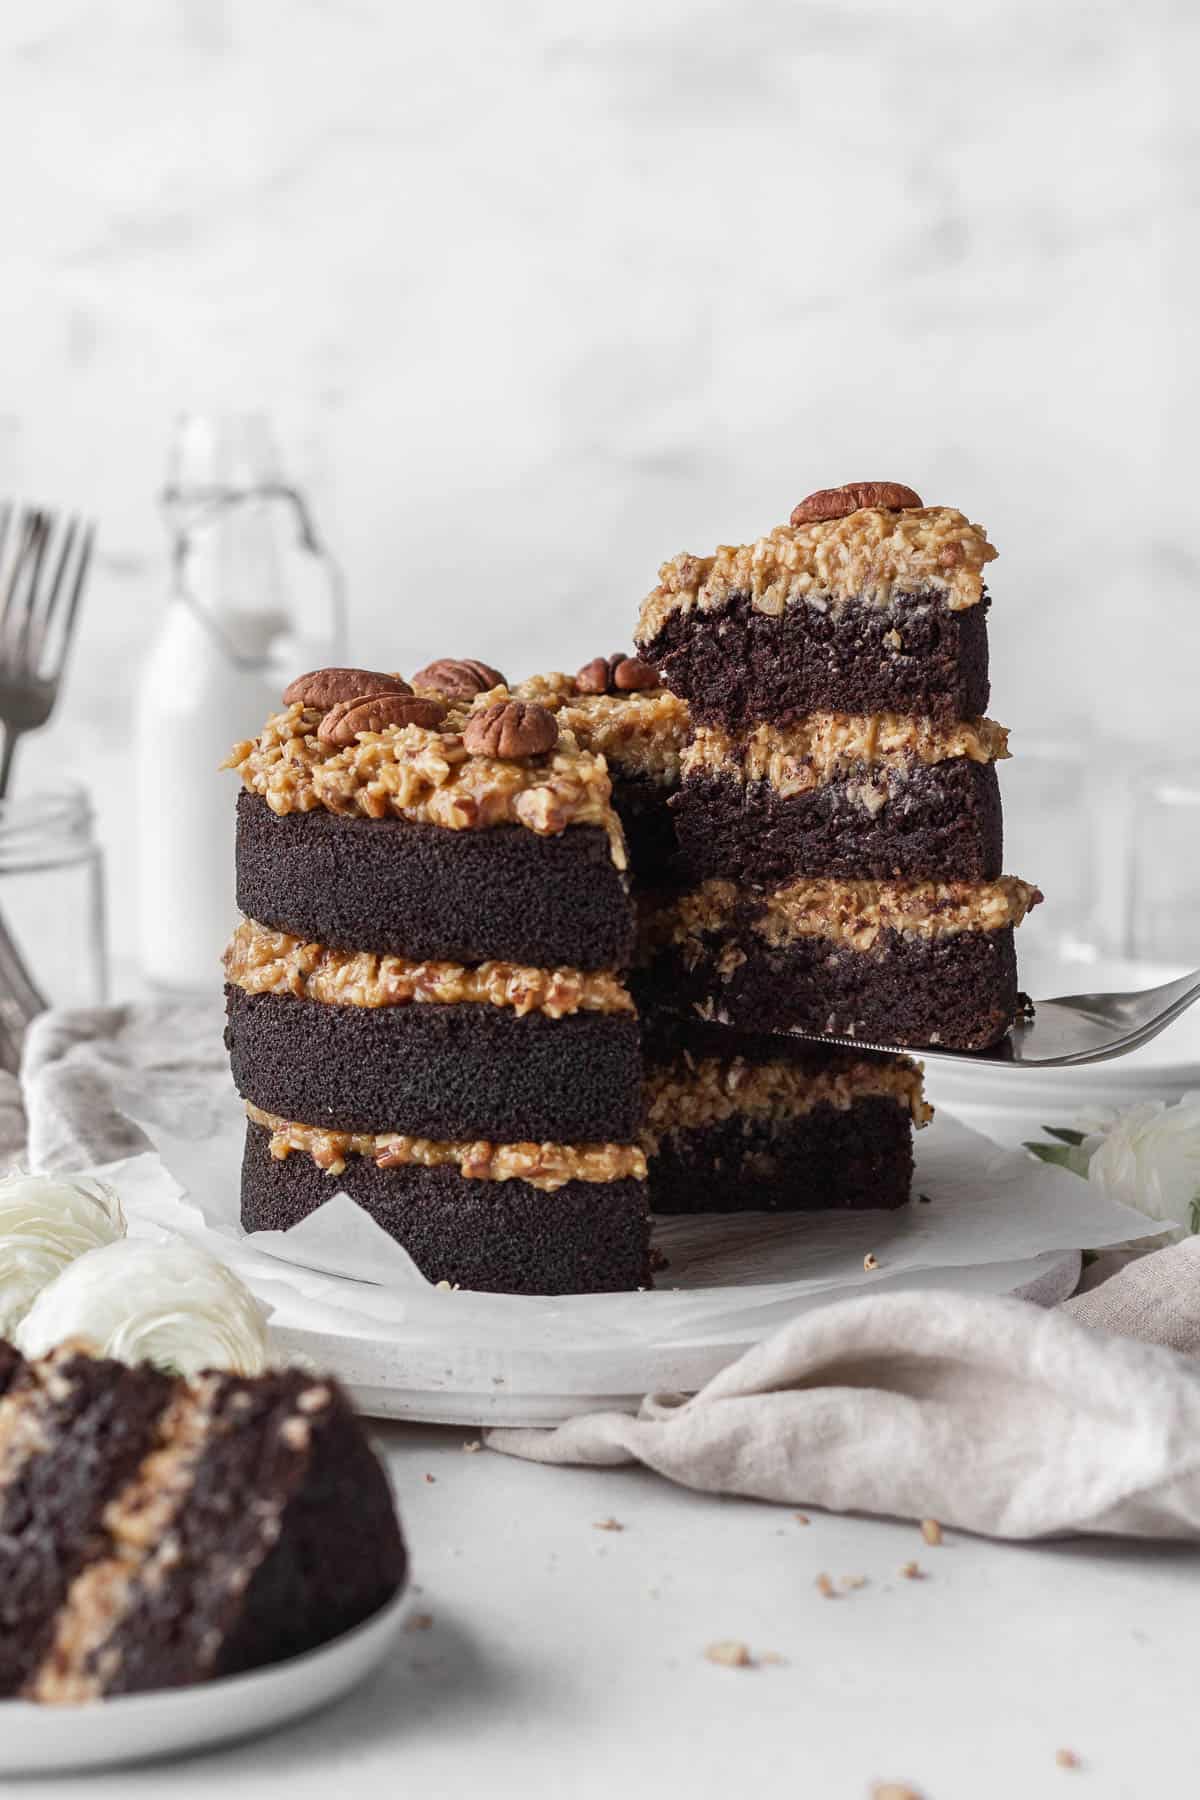 A gluten-free German chocolate cake with a slice being taken out.